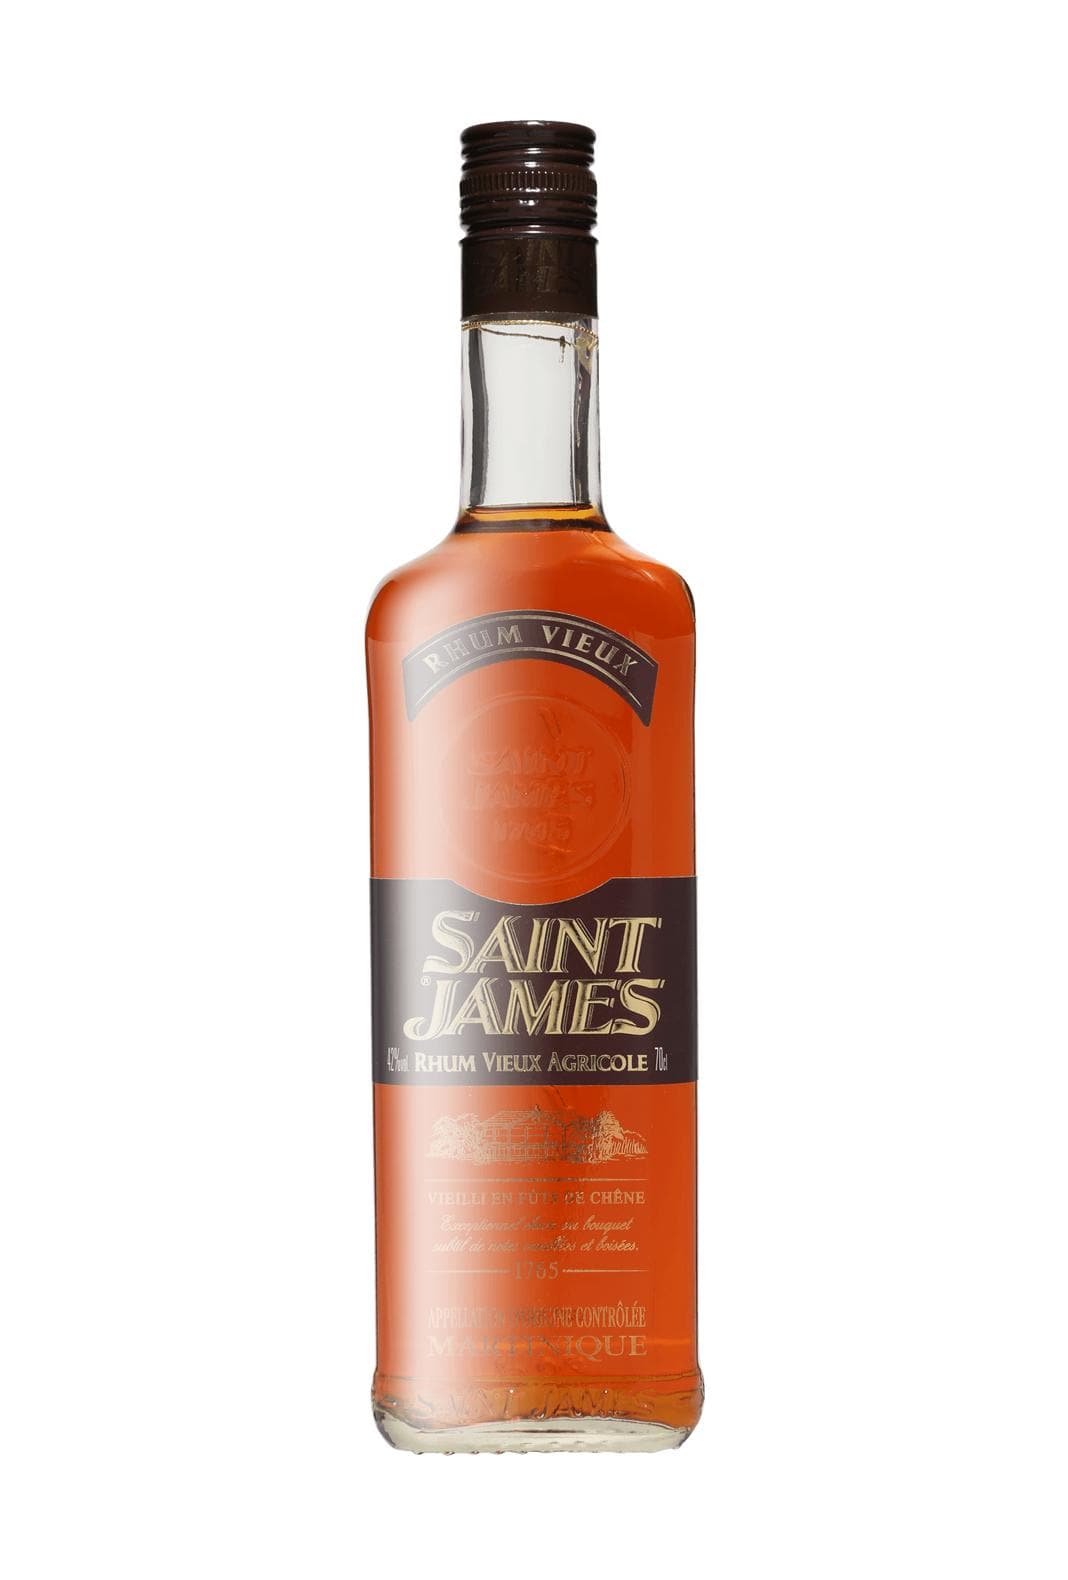 St James Rum Agricole Vieux (Old) 40% 700ml | Rum | Shop online at Spirits of France